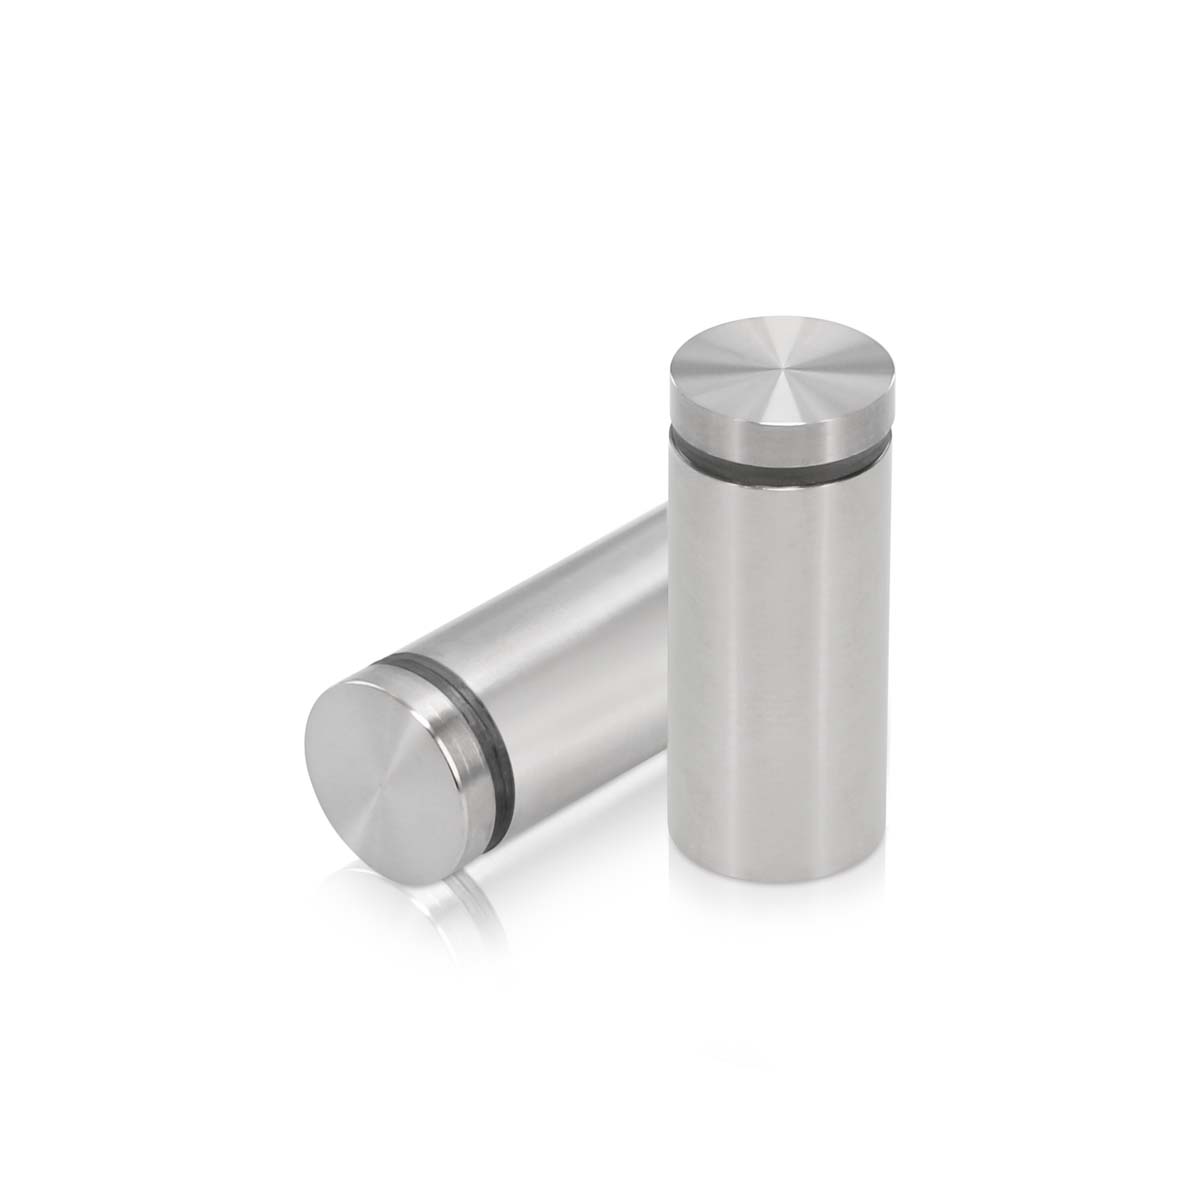 7/8'' Diameter X 1-3/4'' Barrel Length, Hollow Stainless Steel Brushed Finish. Easy Fasten Standoff (For Inside Use Only) [Required Material Hole Size: 7/16'']